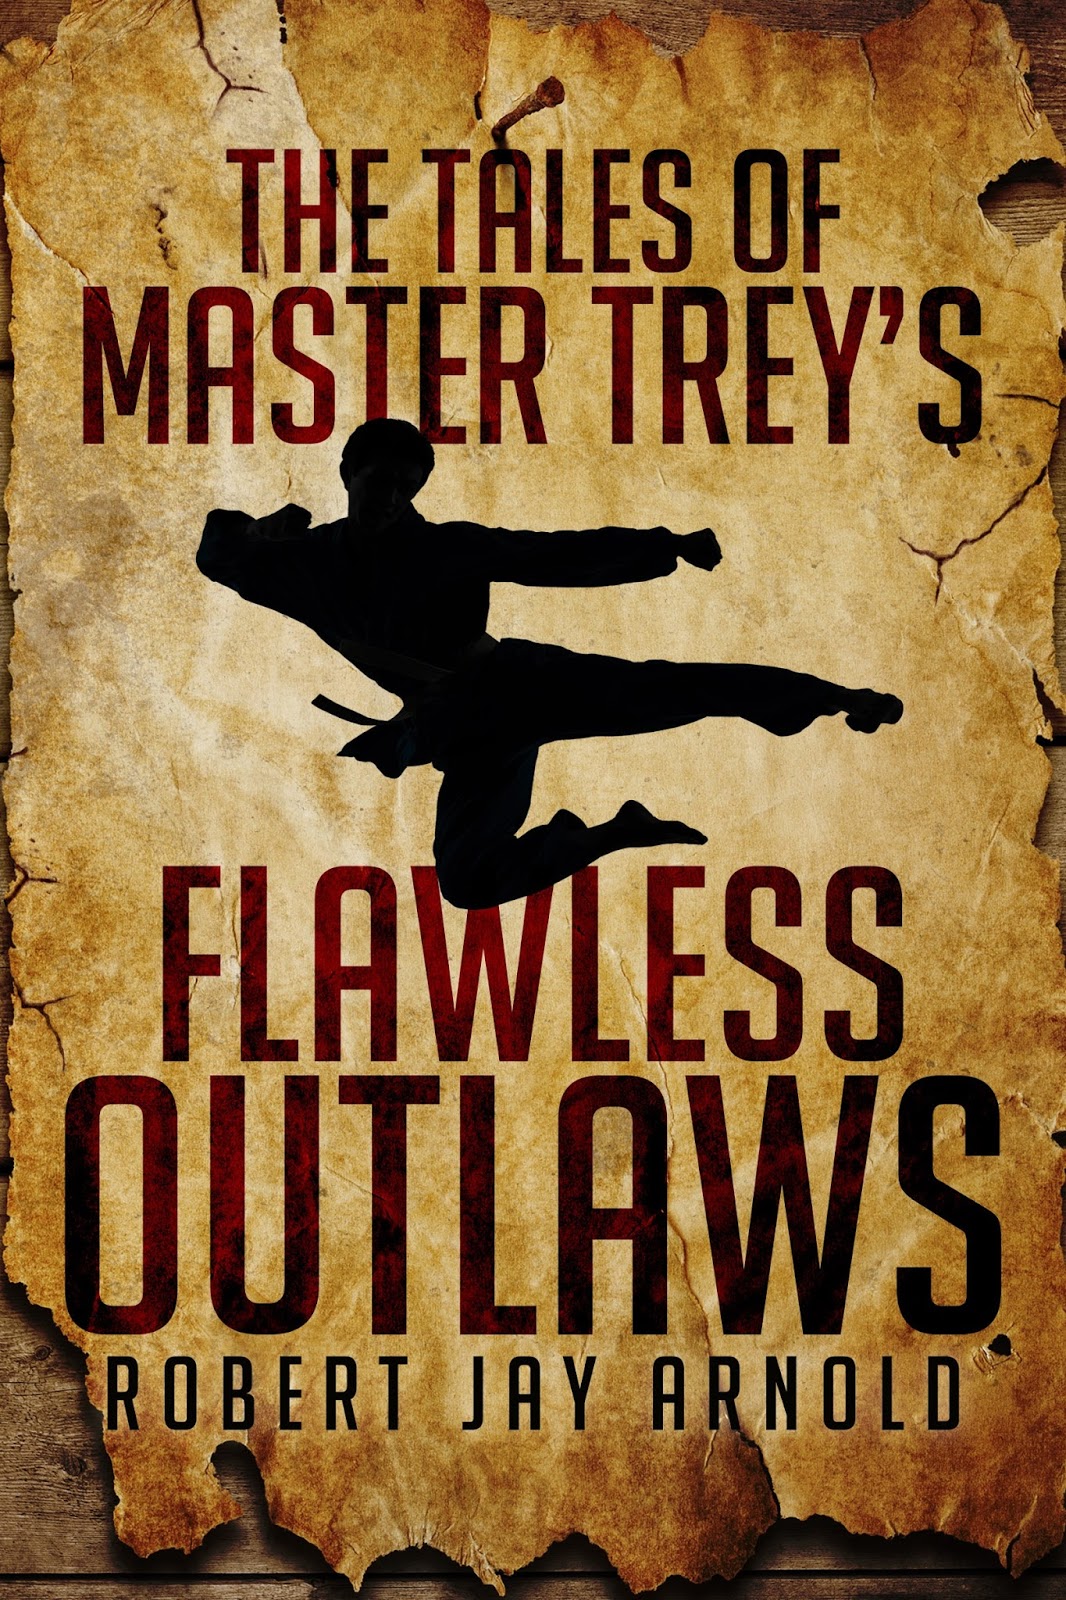 FREE: The Tales of Master Trey’s Flawless Outlaws by Robert Jay Arnold